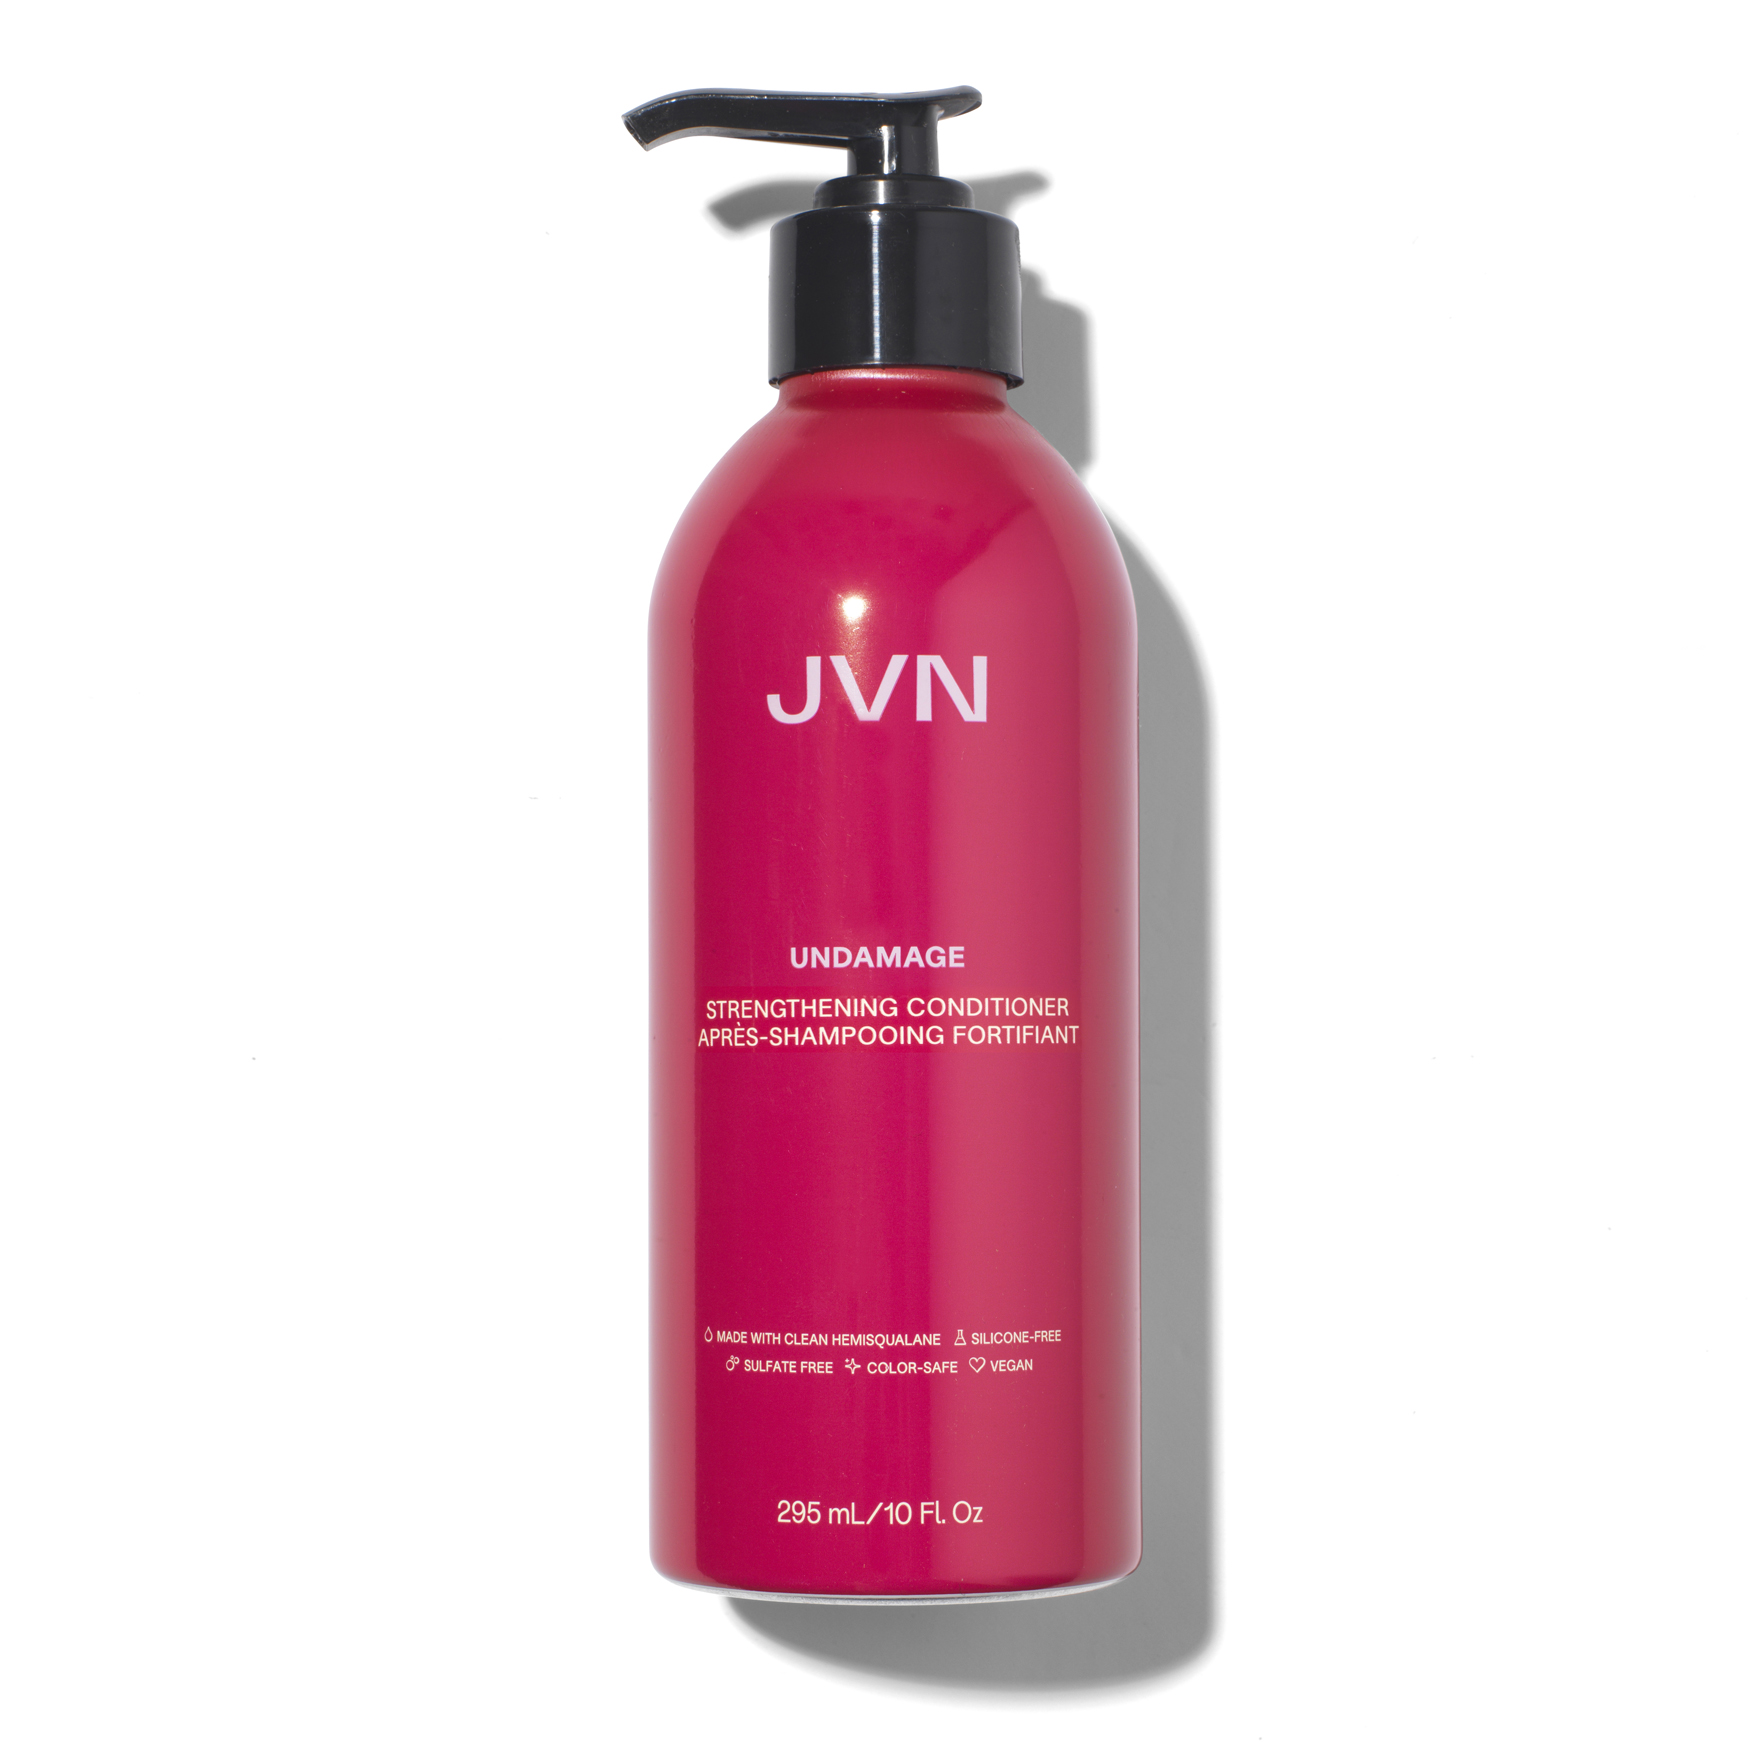 JVN Hair Après-shampooing fortifiant Undamage | Space NK